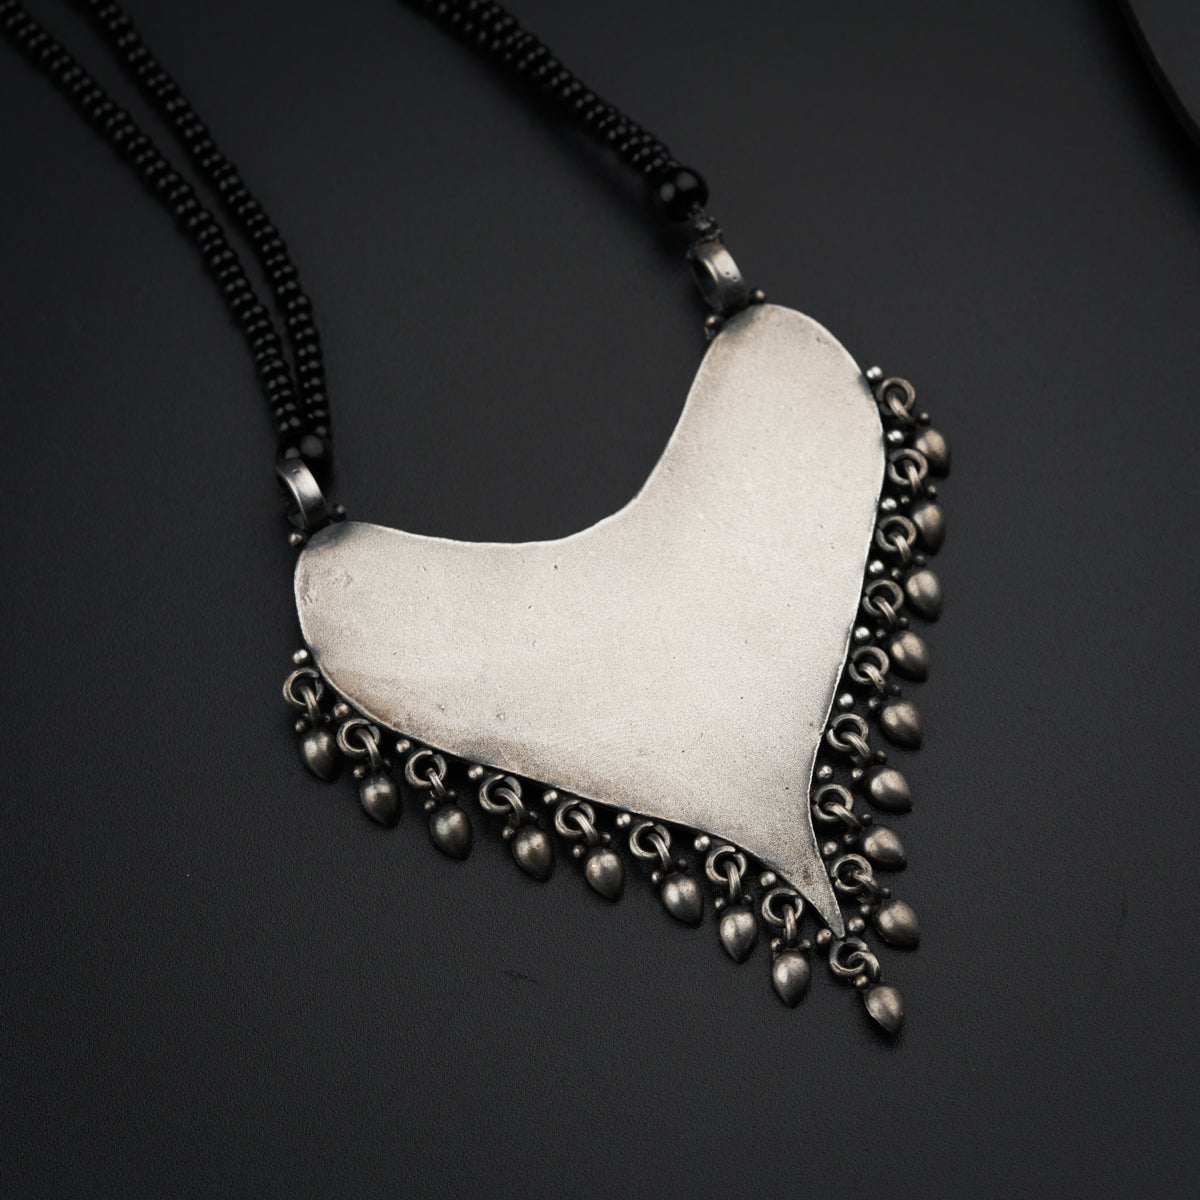 a white heart shaped pendant on a black background